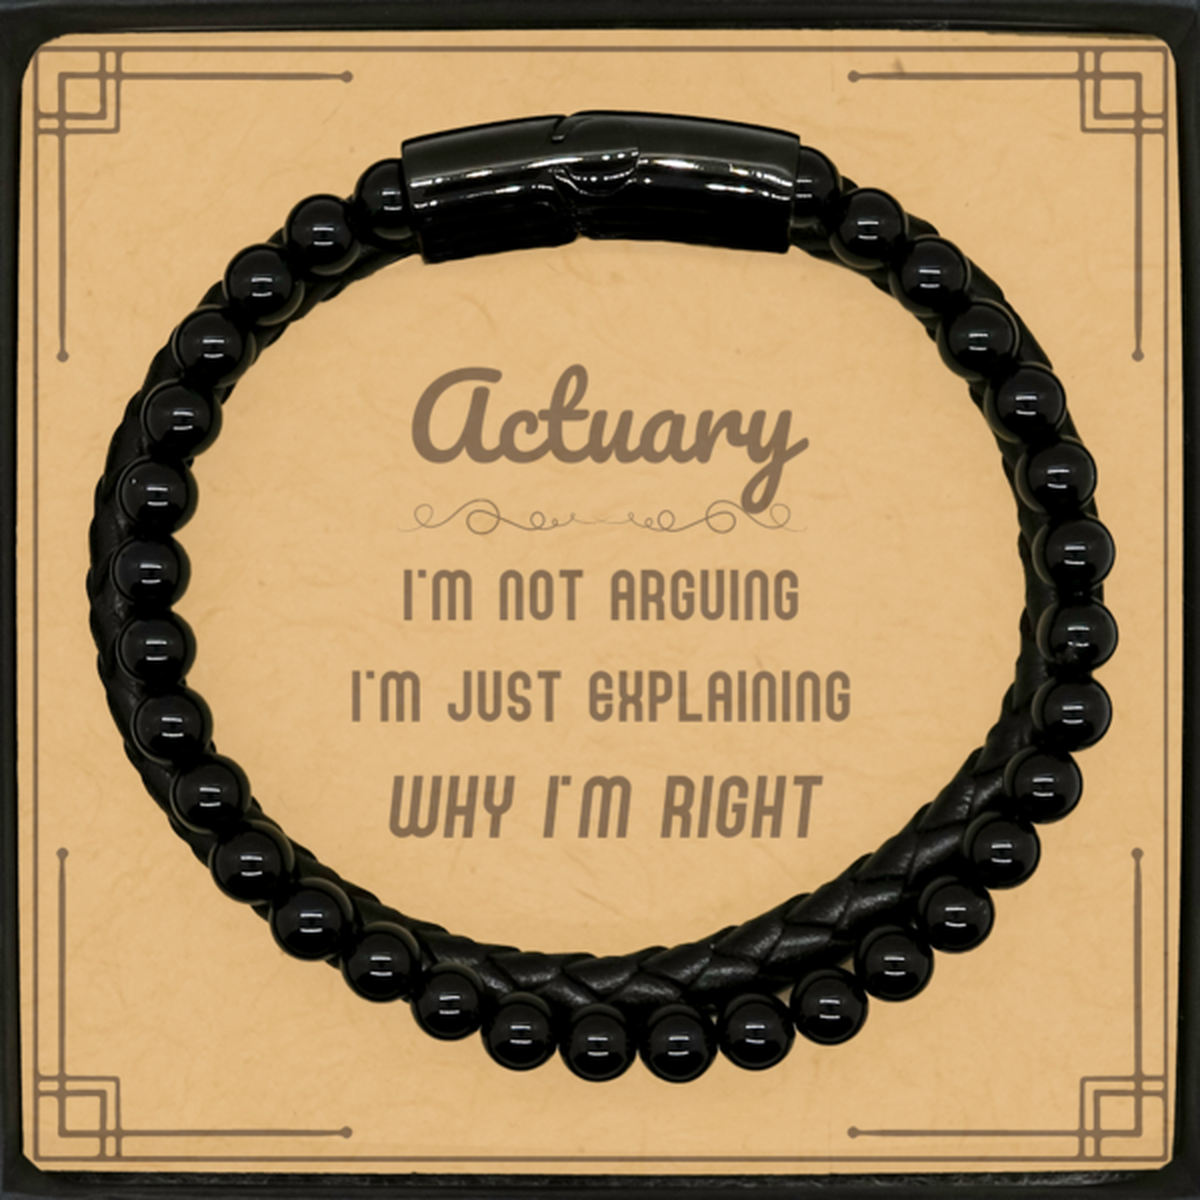 Actuary I'm not Arguing. I'm Just Explaining Why I'm RIGHT Stone Leather Bracelets, Funny Saying Quote Actuary Gifts For Actuary Message Card Graduation Birthday Christmas Gifts for Men Women Coworker